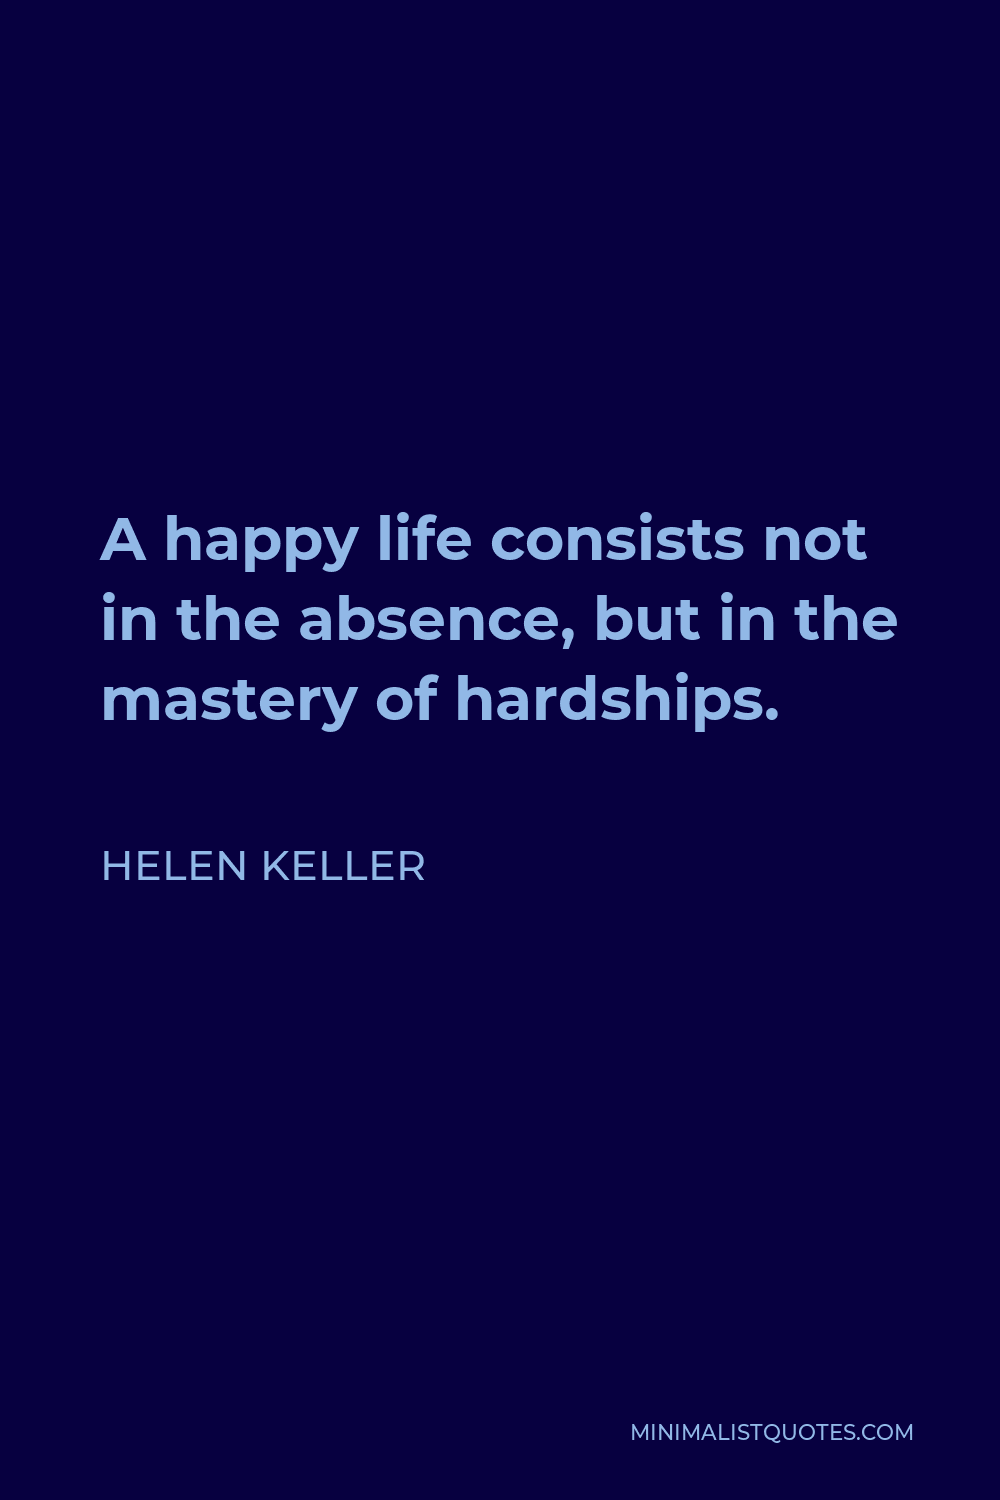 Helen Keller Quote - A happy life consists not in the absence, but in the mastery of hardships.